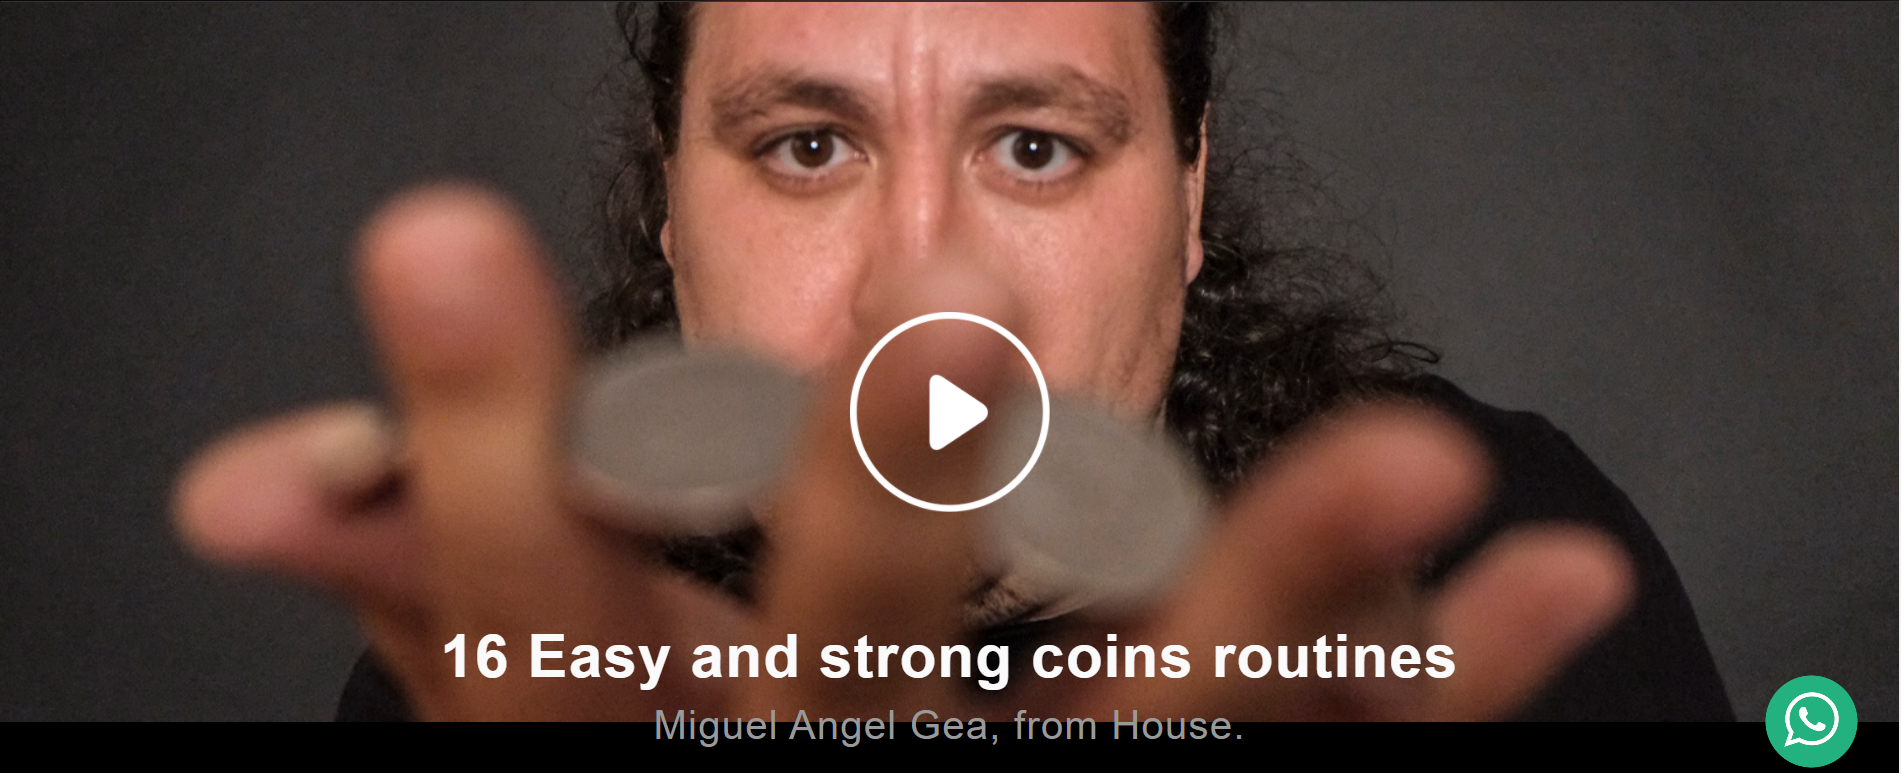 16 Easy and Strong Coins Routines by Miguel Angel Gea from House (MP4 Video Download)